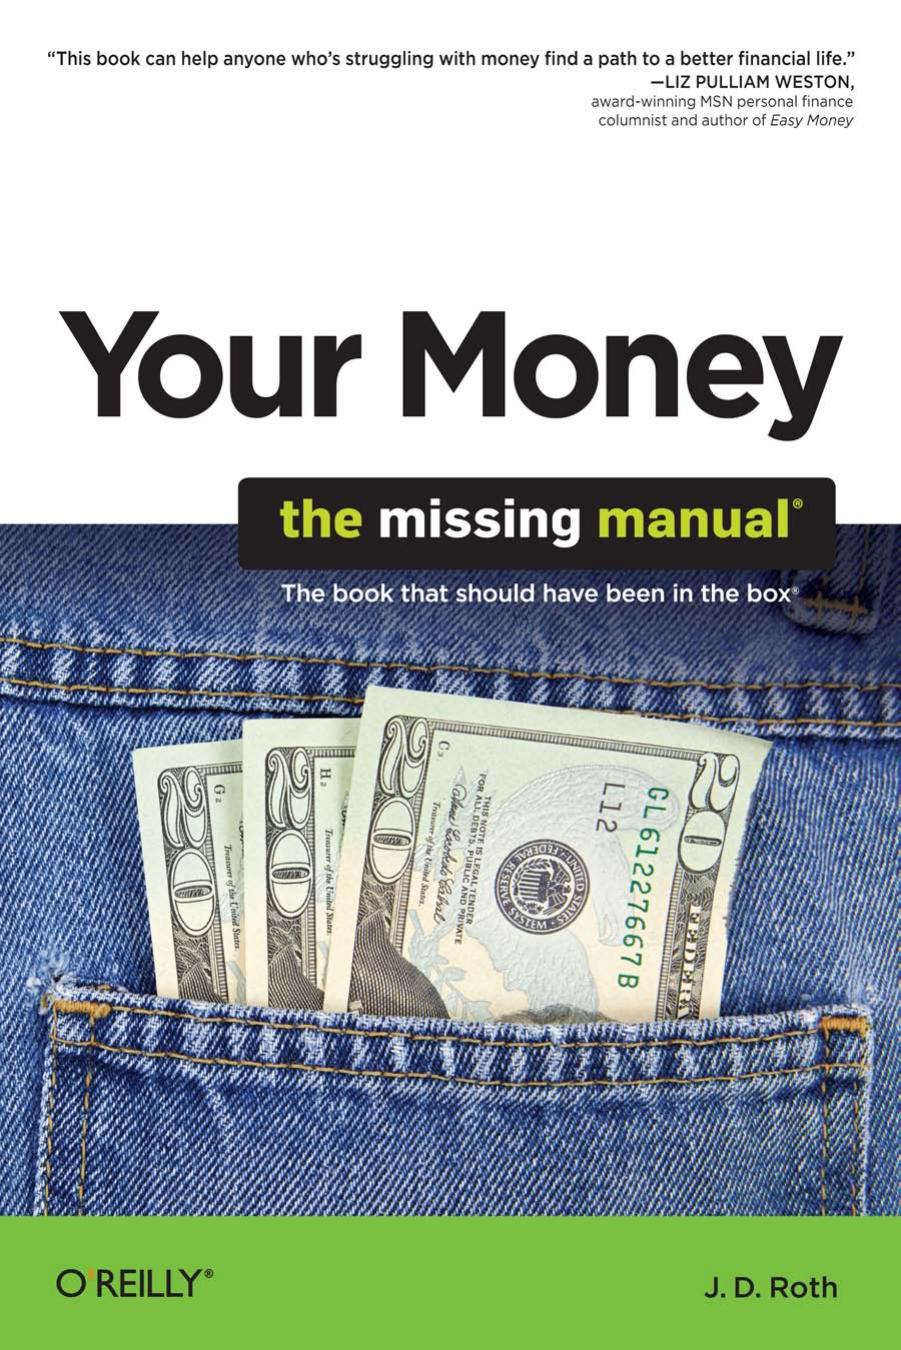 Your Money: The Missing Manual by J.D. Roth